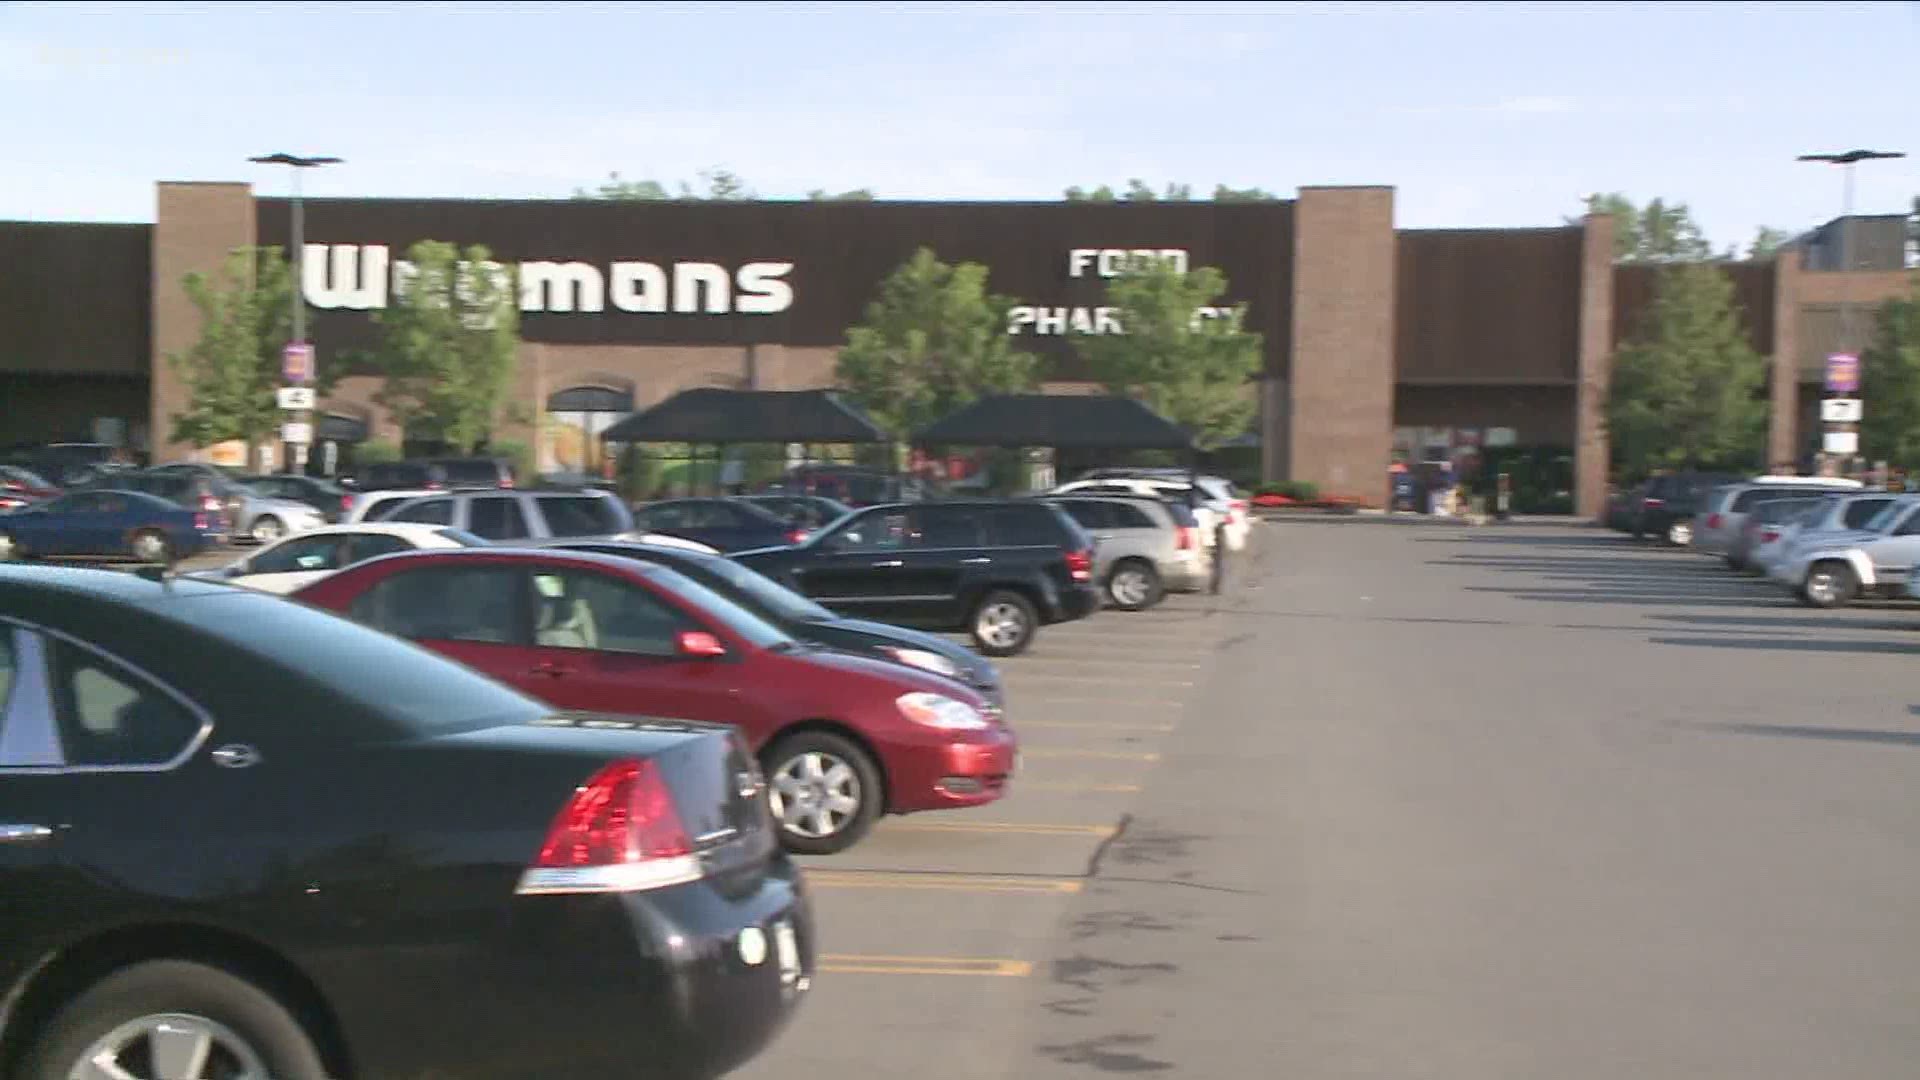 Wegmans announced that it's going to be expanding its hours tomorrow across New York state, store will now be open from 6 in the morning until midnight.